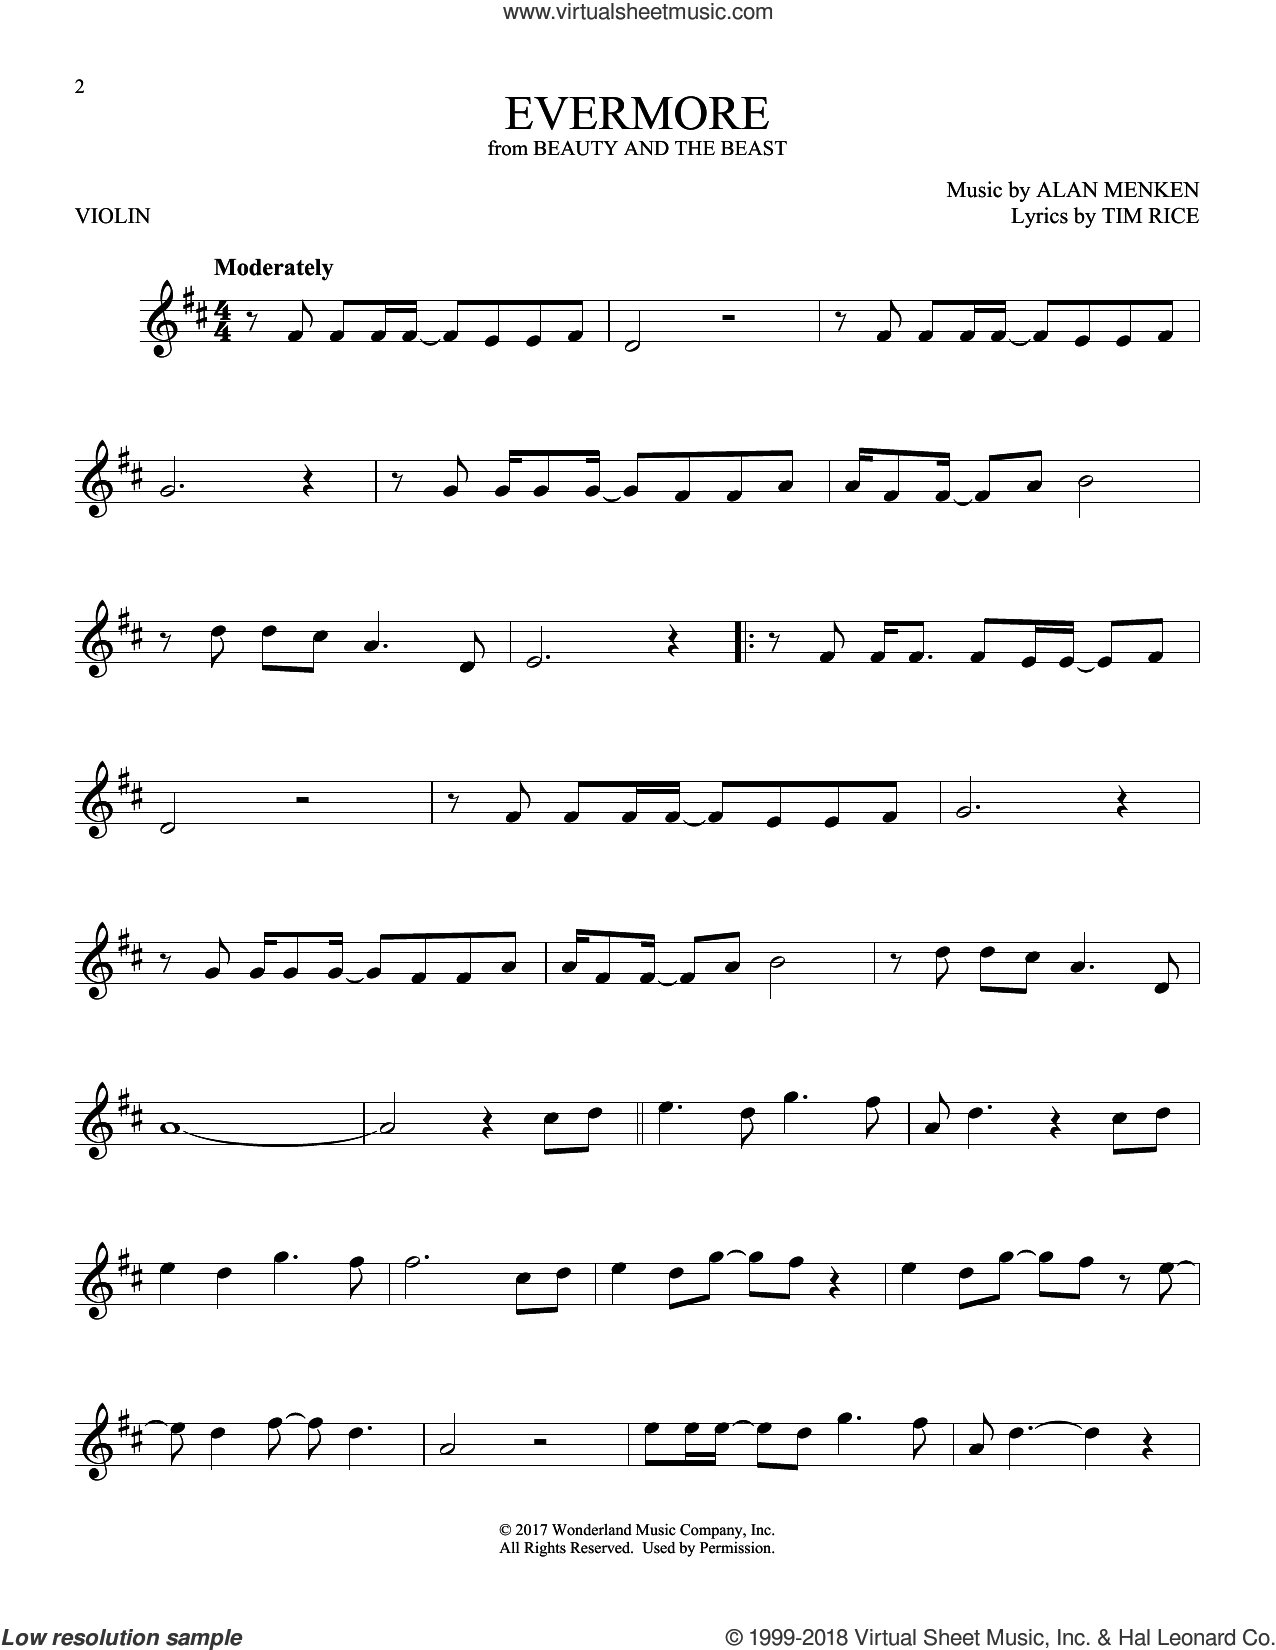 Violin solo sheet music for Evermore from Beauty and the Beast